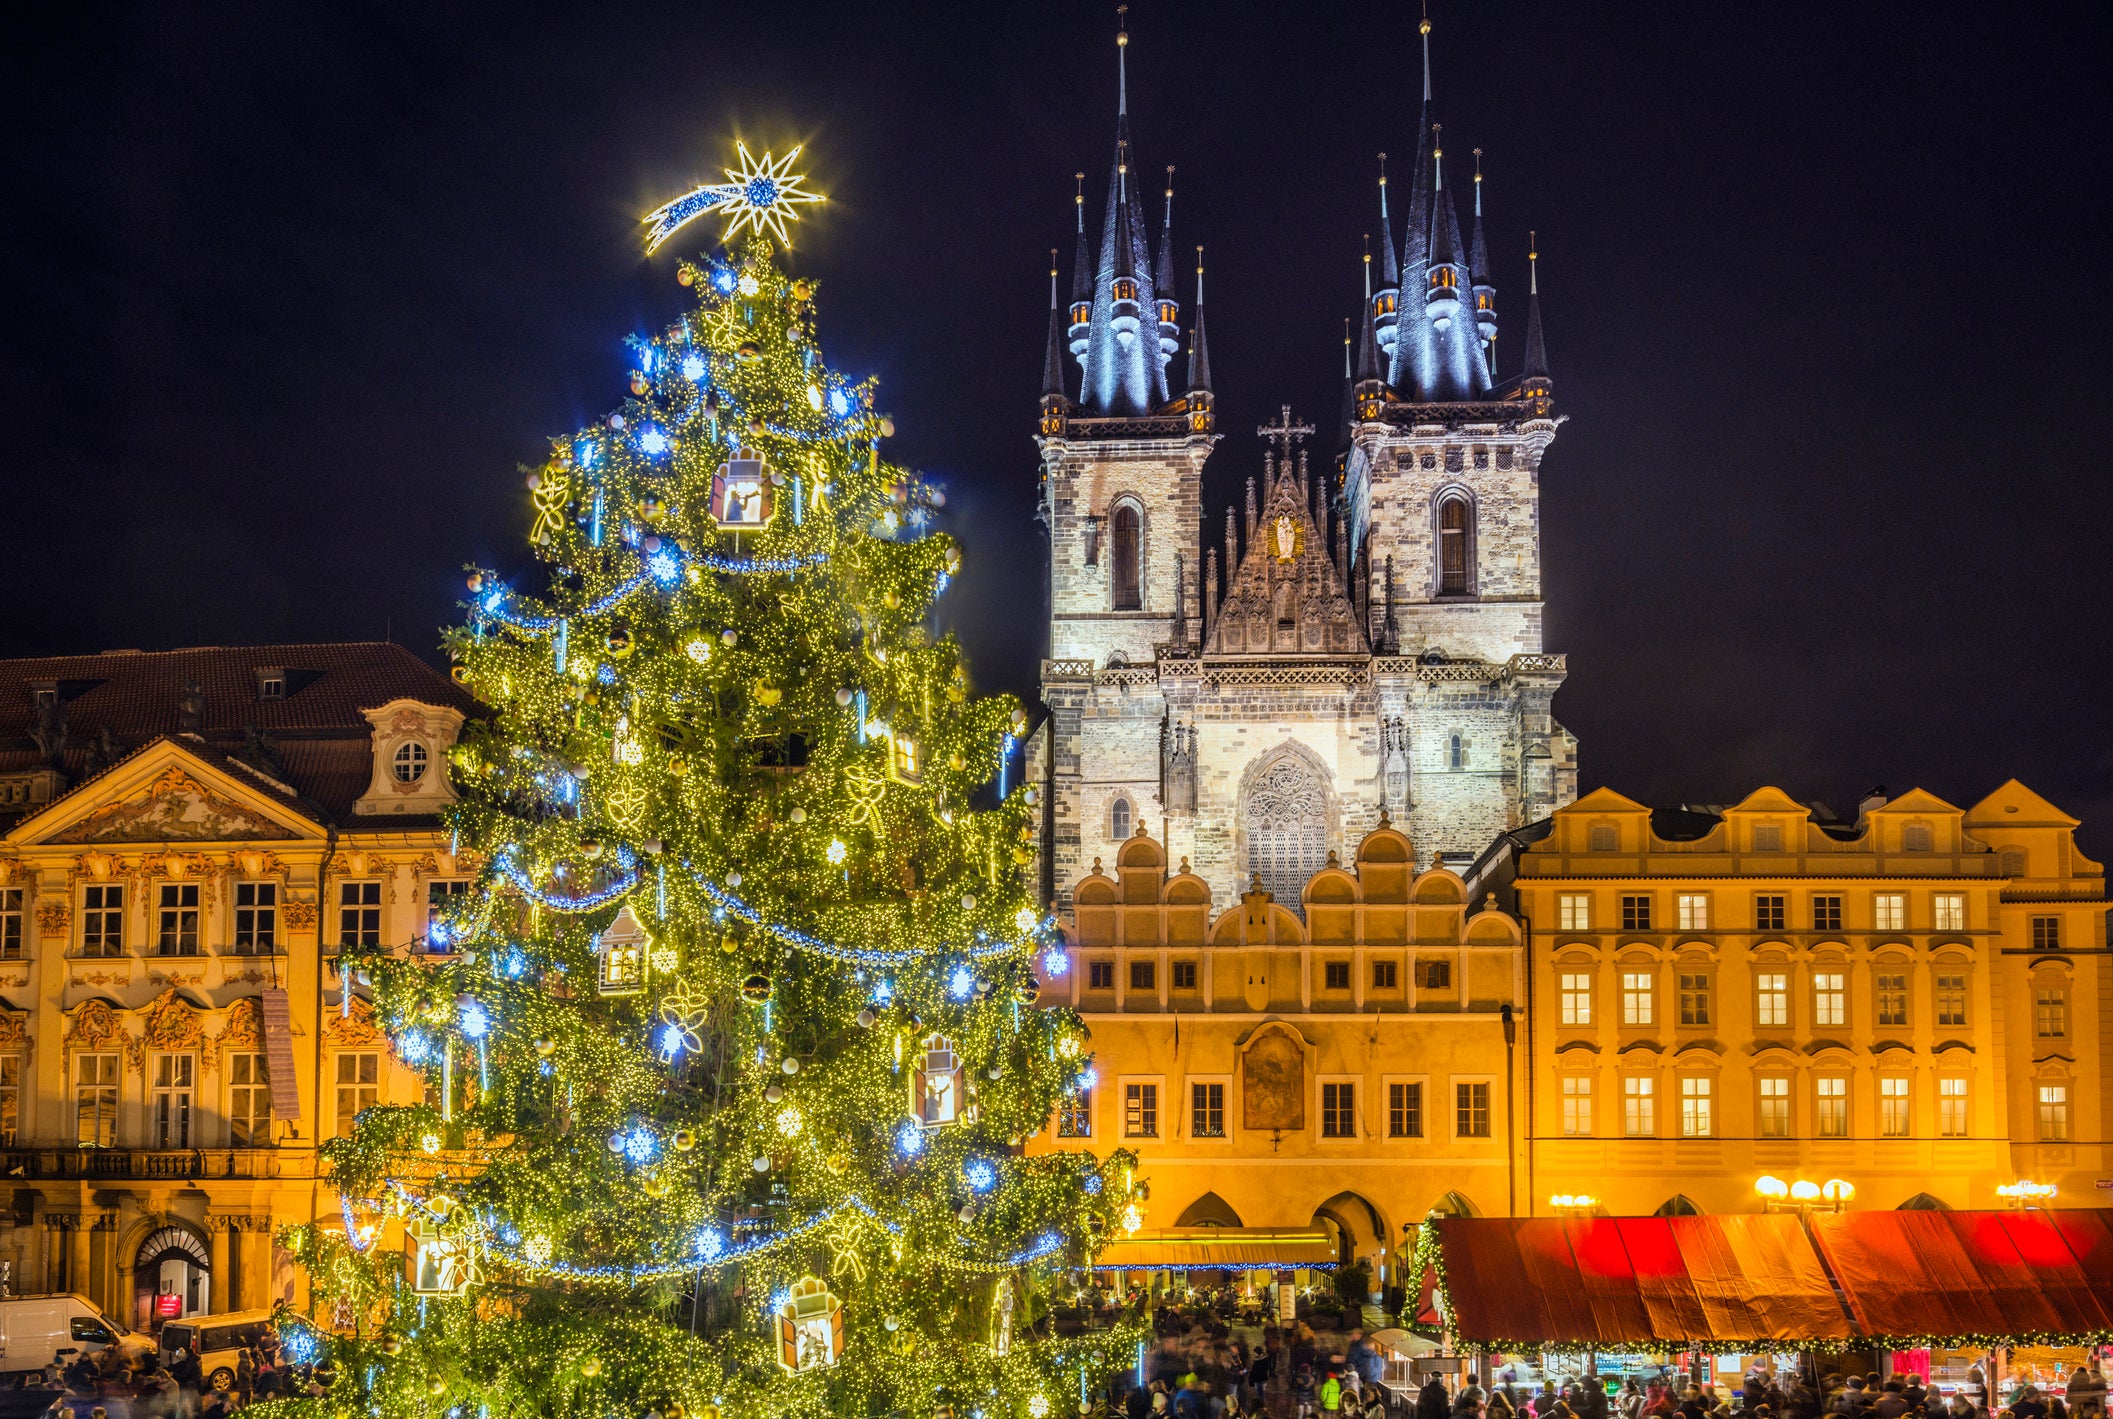 Celebrate Christmas with traditional folklore shows, concerts and cruises in the Czech capital